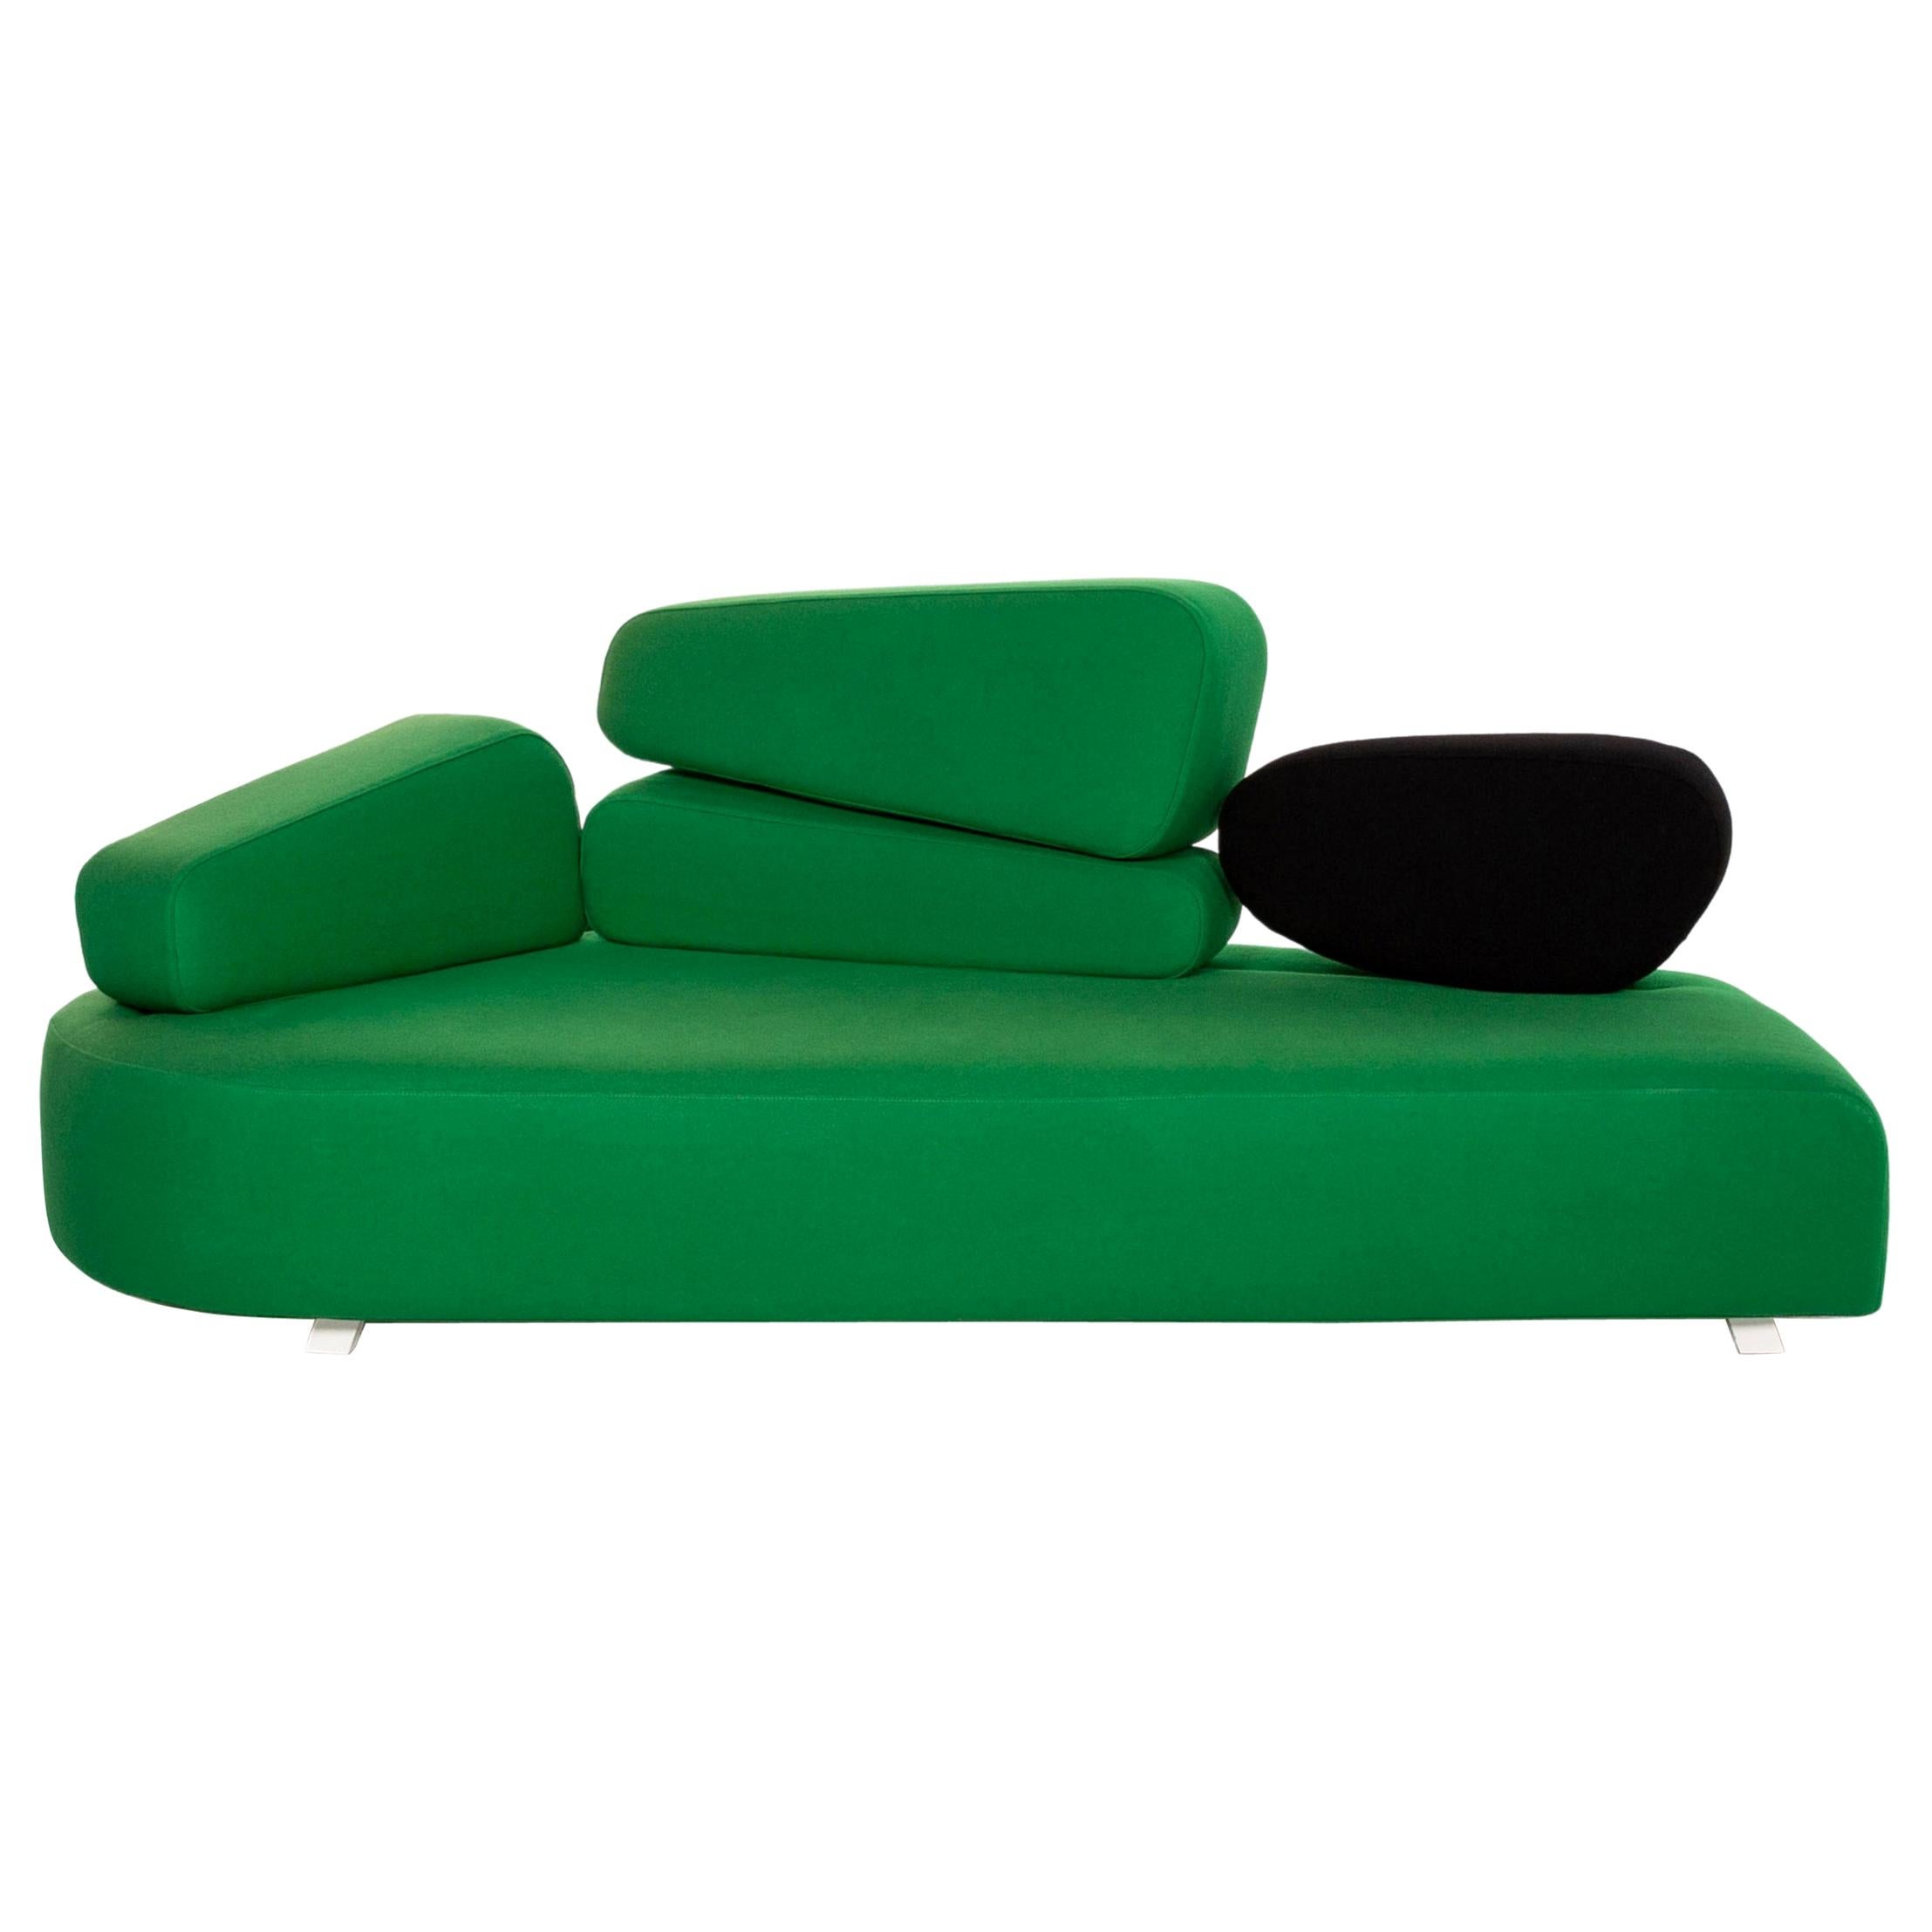 Brühl & Sippold Mosspink Fabric Sofa Green Three-Seat Couch For Sale